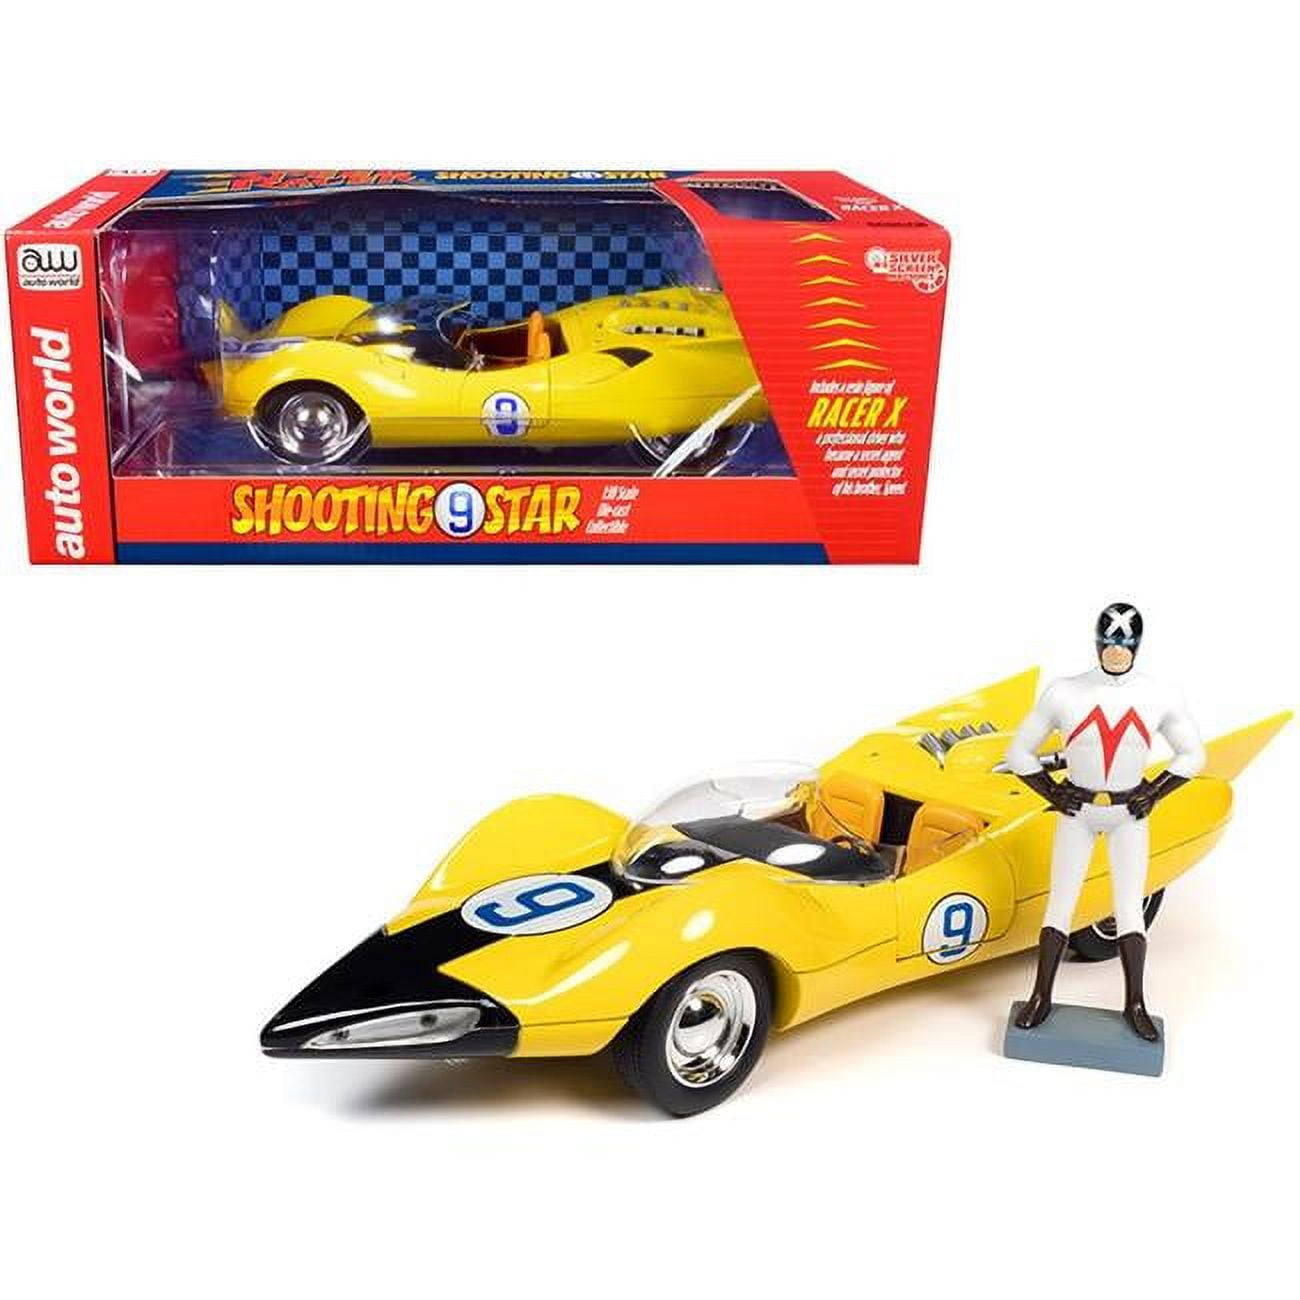 Picture of Autoworld AWSS125 Shooting Star No. 9 Yellow & Racer X Figurine Speed Racer Anime for Series 1-18 Diecast Model Car